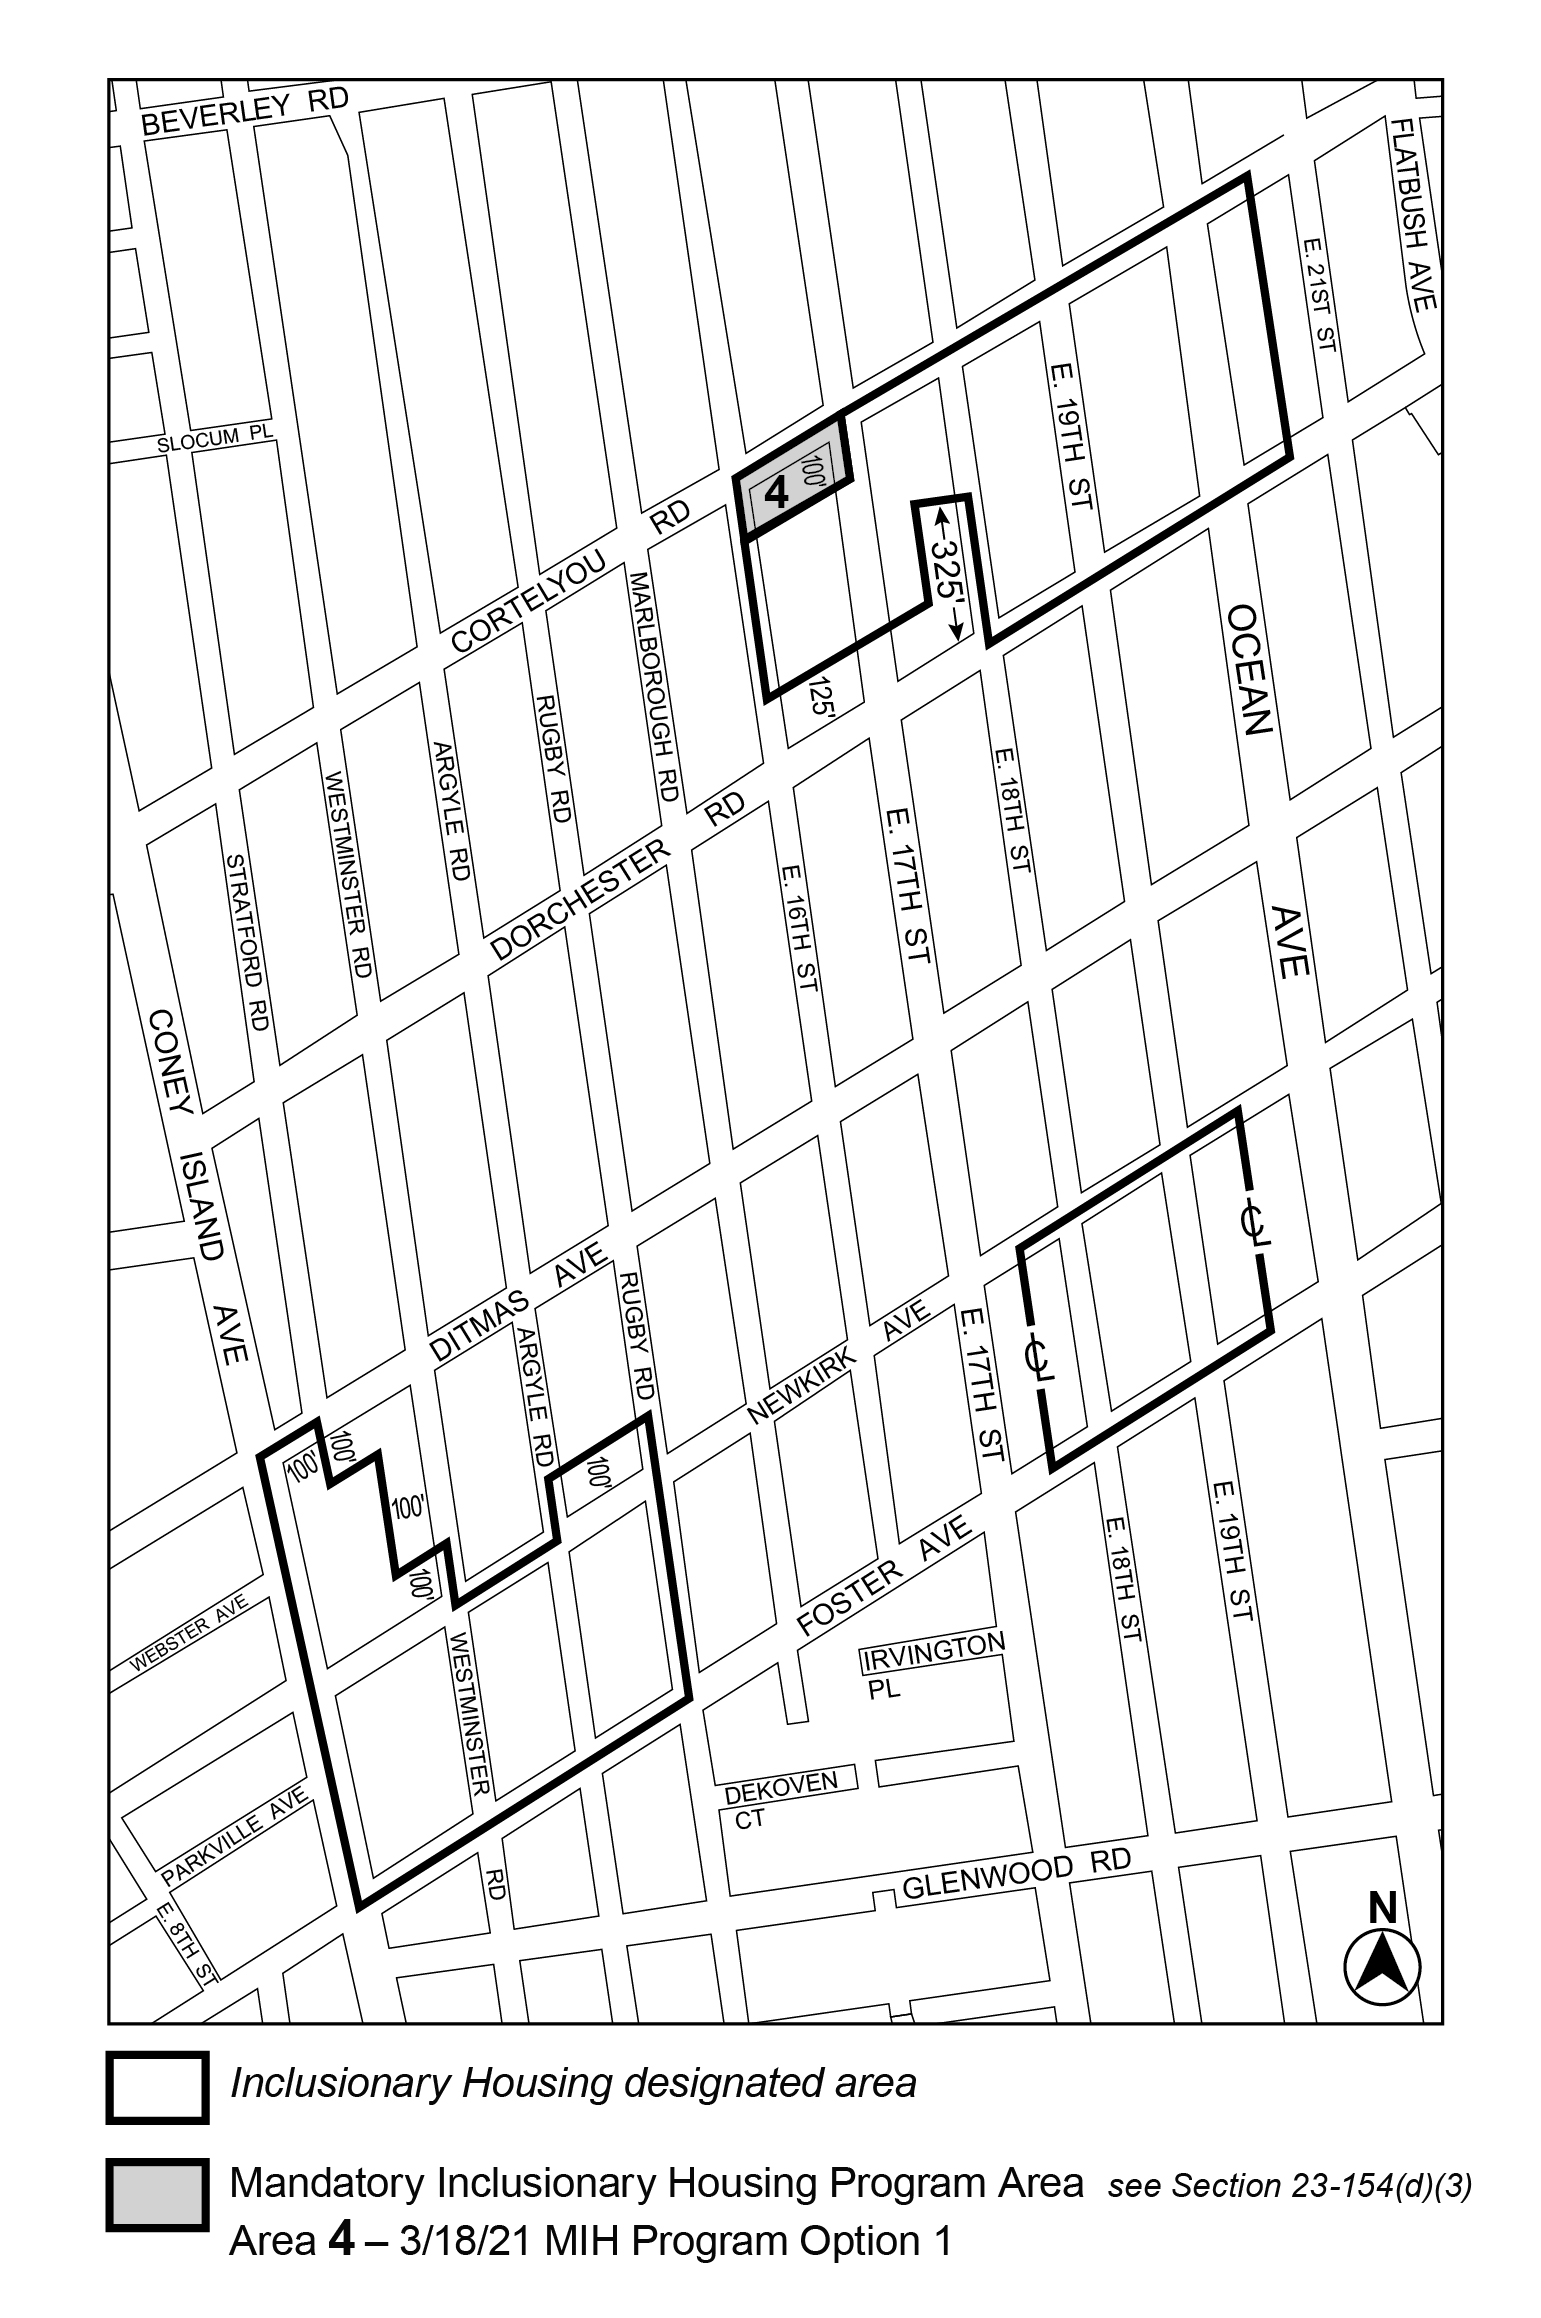 APPENDIX F. BK CD 14, Map 3, MIH area 4 per 1620 Cortelyou Road (N 180497 ZRK), adopted 18 March, 2021